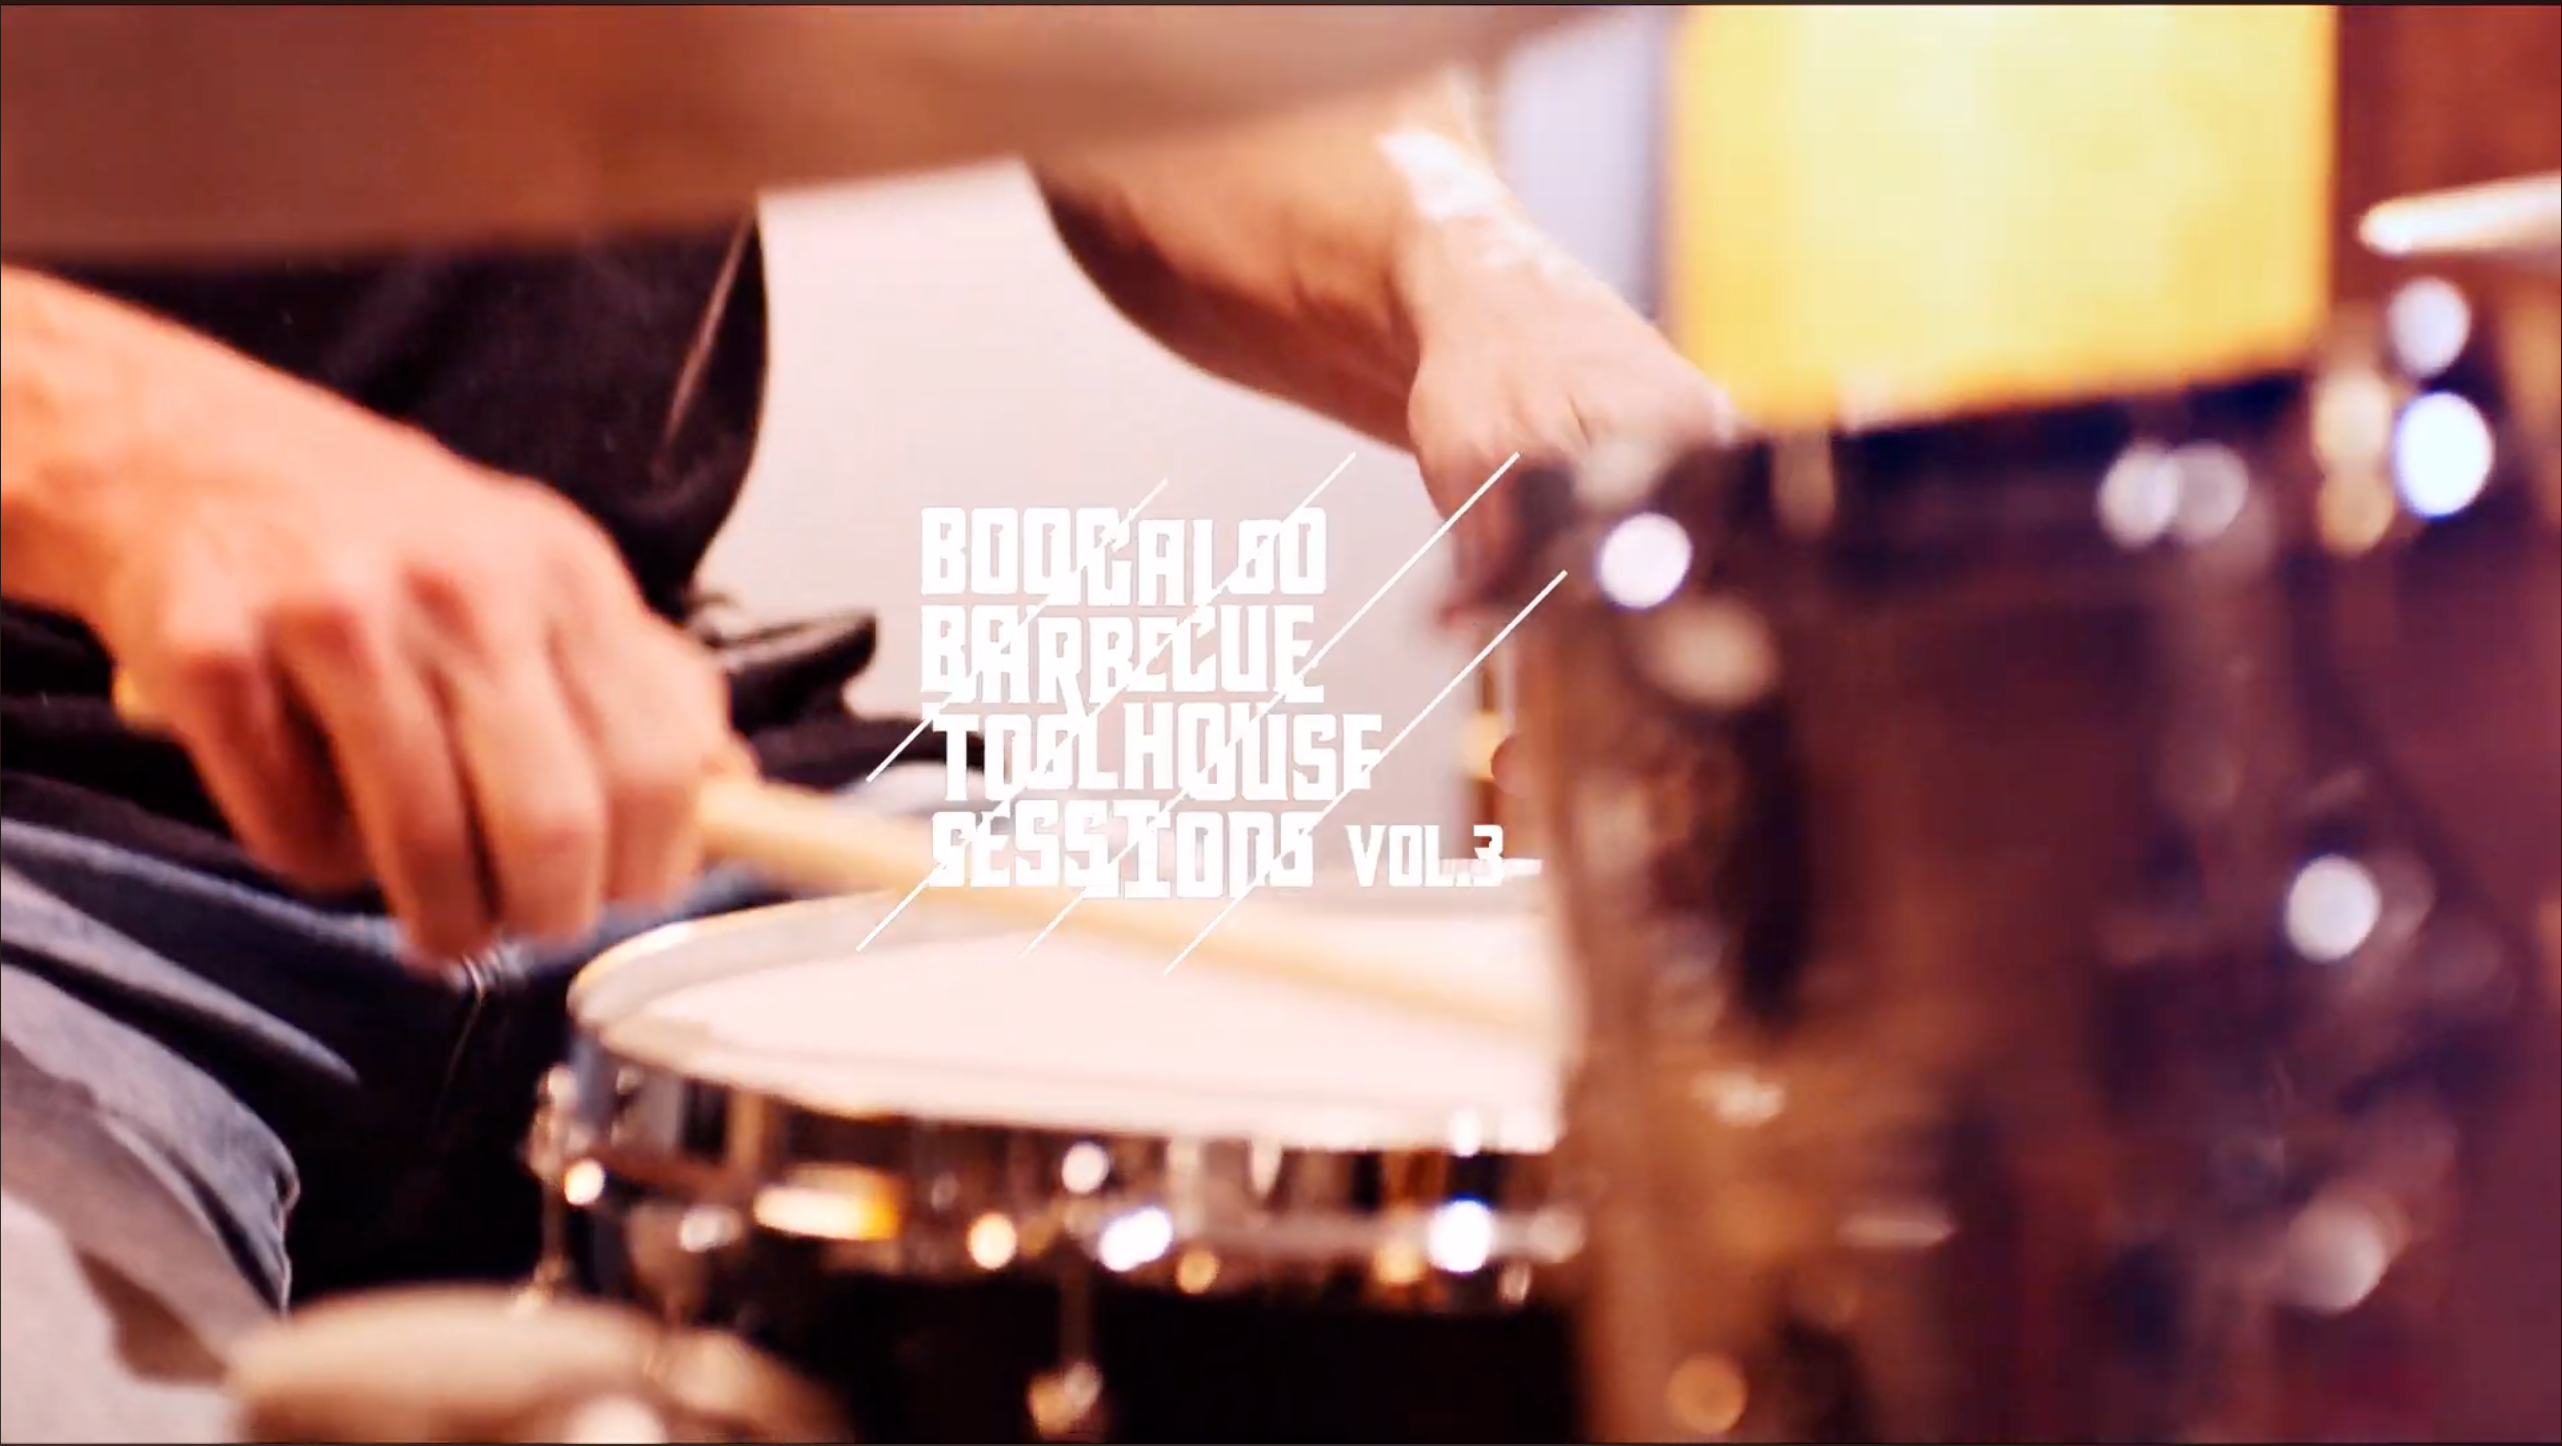 ‚BOOGALOO BBQ Toolhouse Session‘ Vol. 3 with REMO & GRETSCH artist Daniel Schild